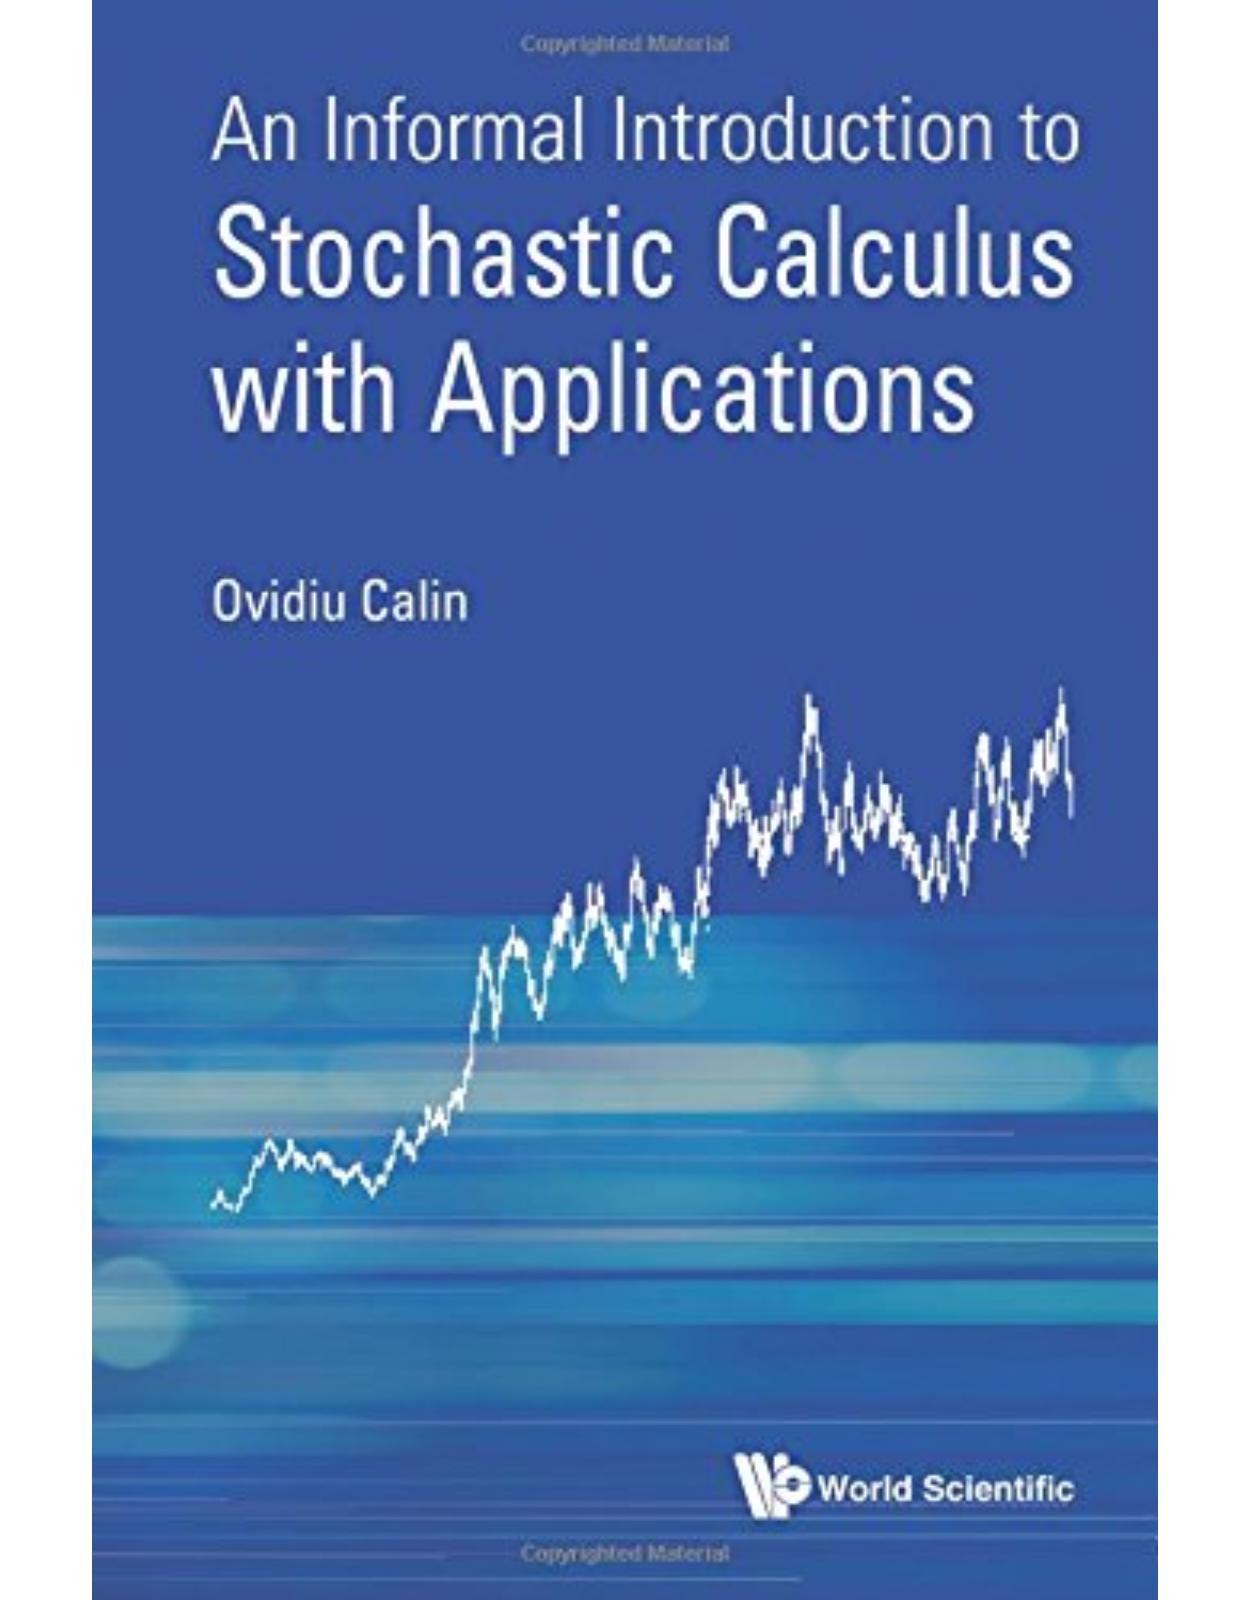 An Informal Introduction to Stochastic Calculus with Applications